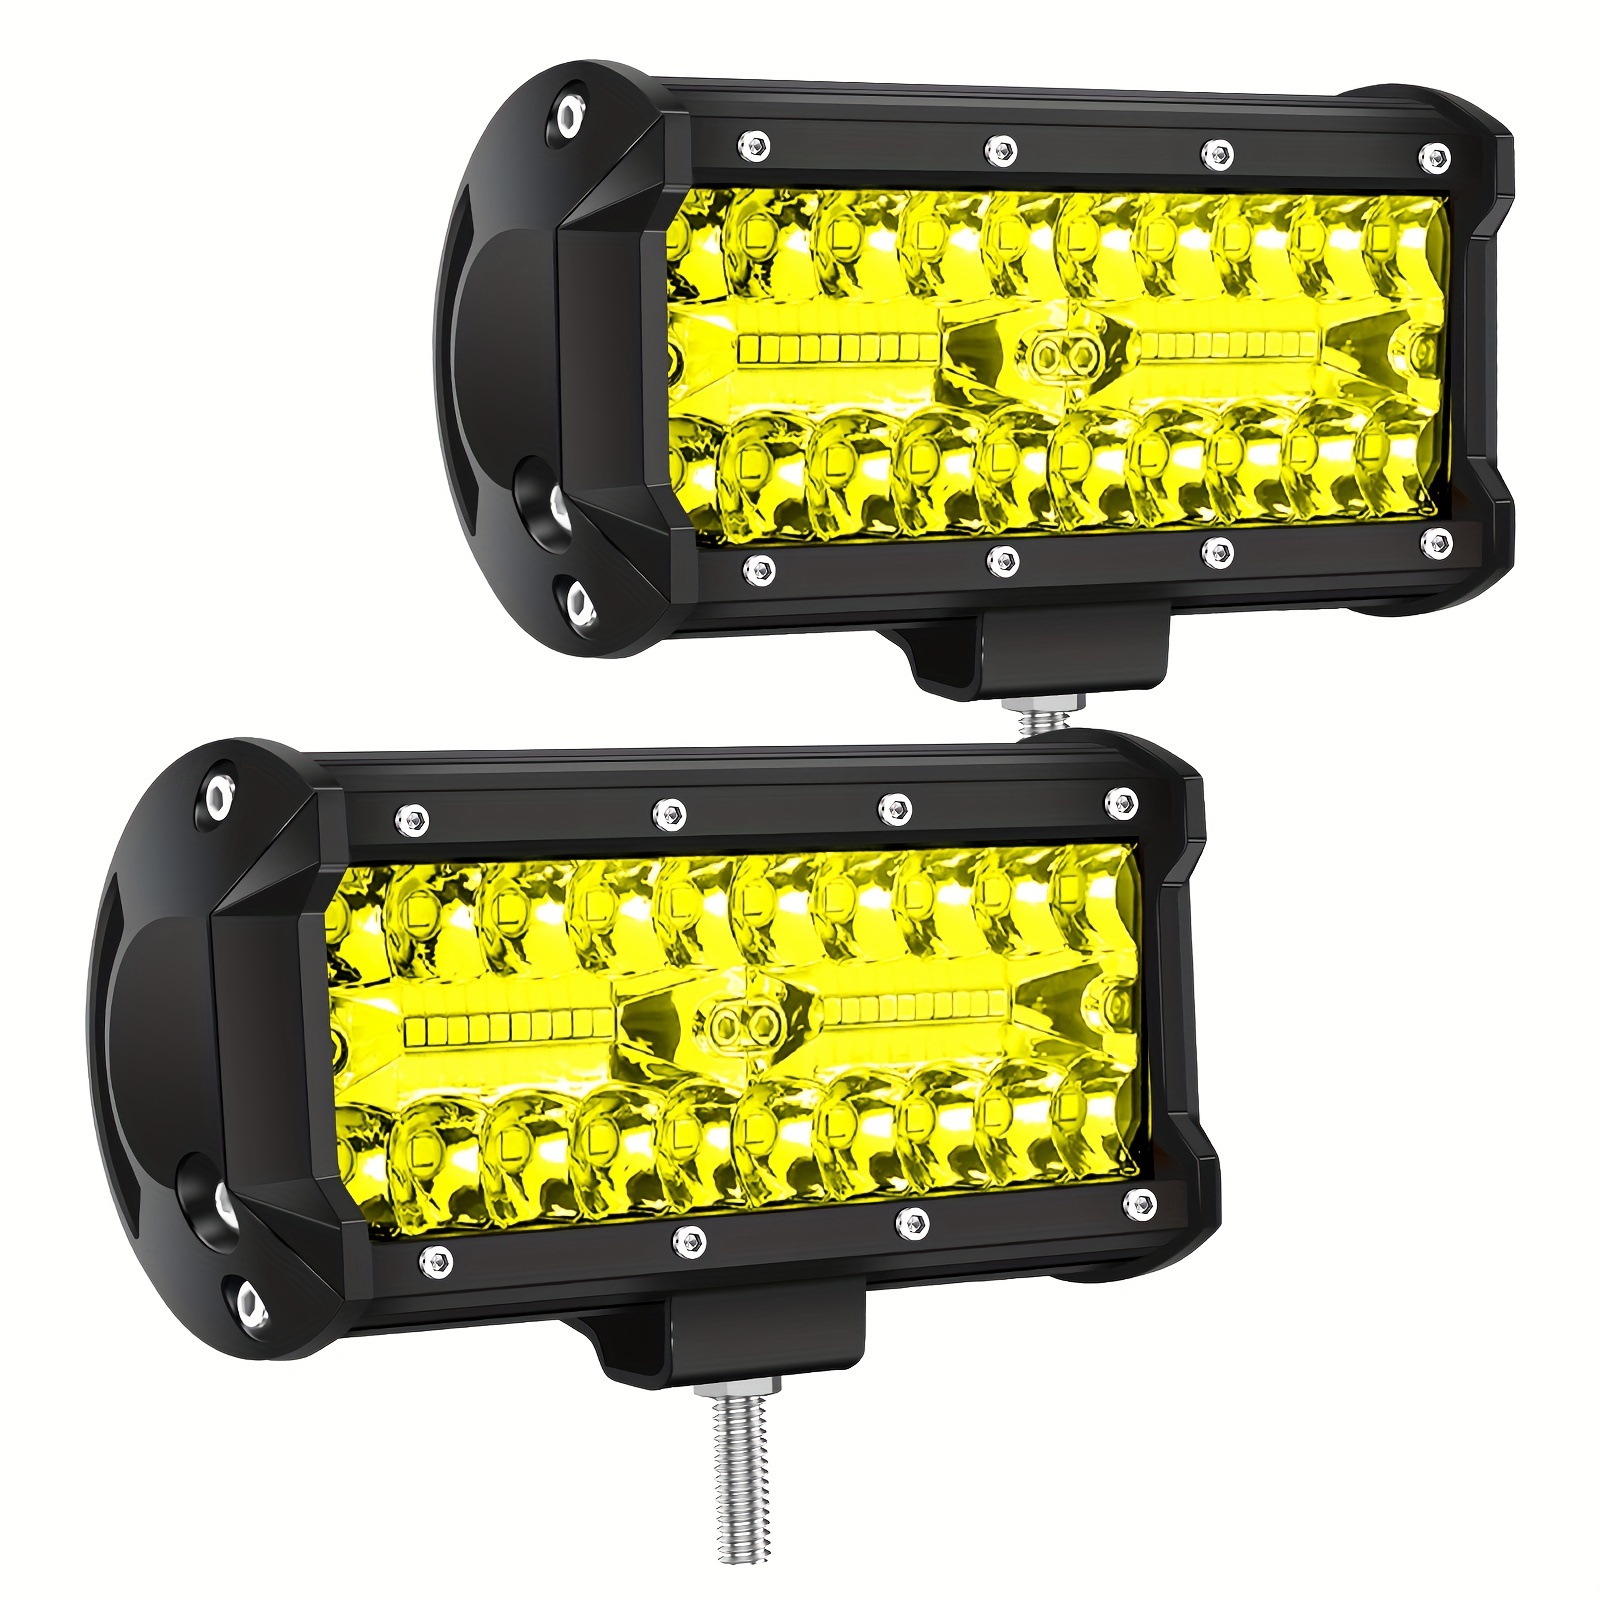 7in 24000LM 240W Offroad LED Driving Lights for Jeep Pickup SUV